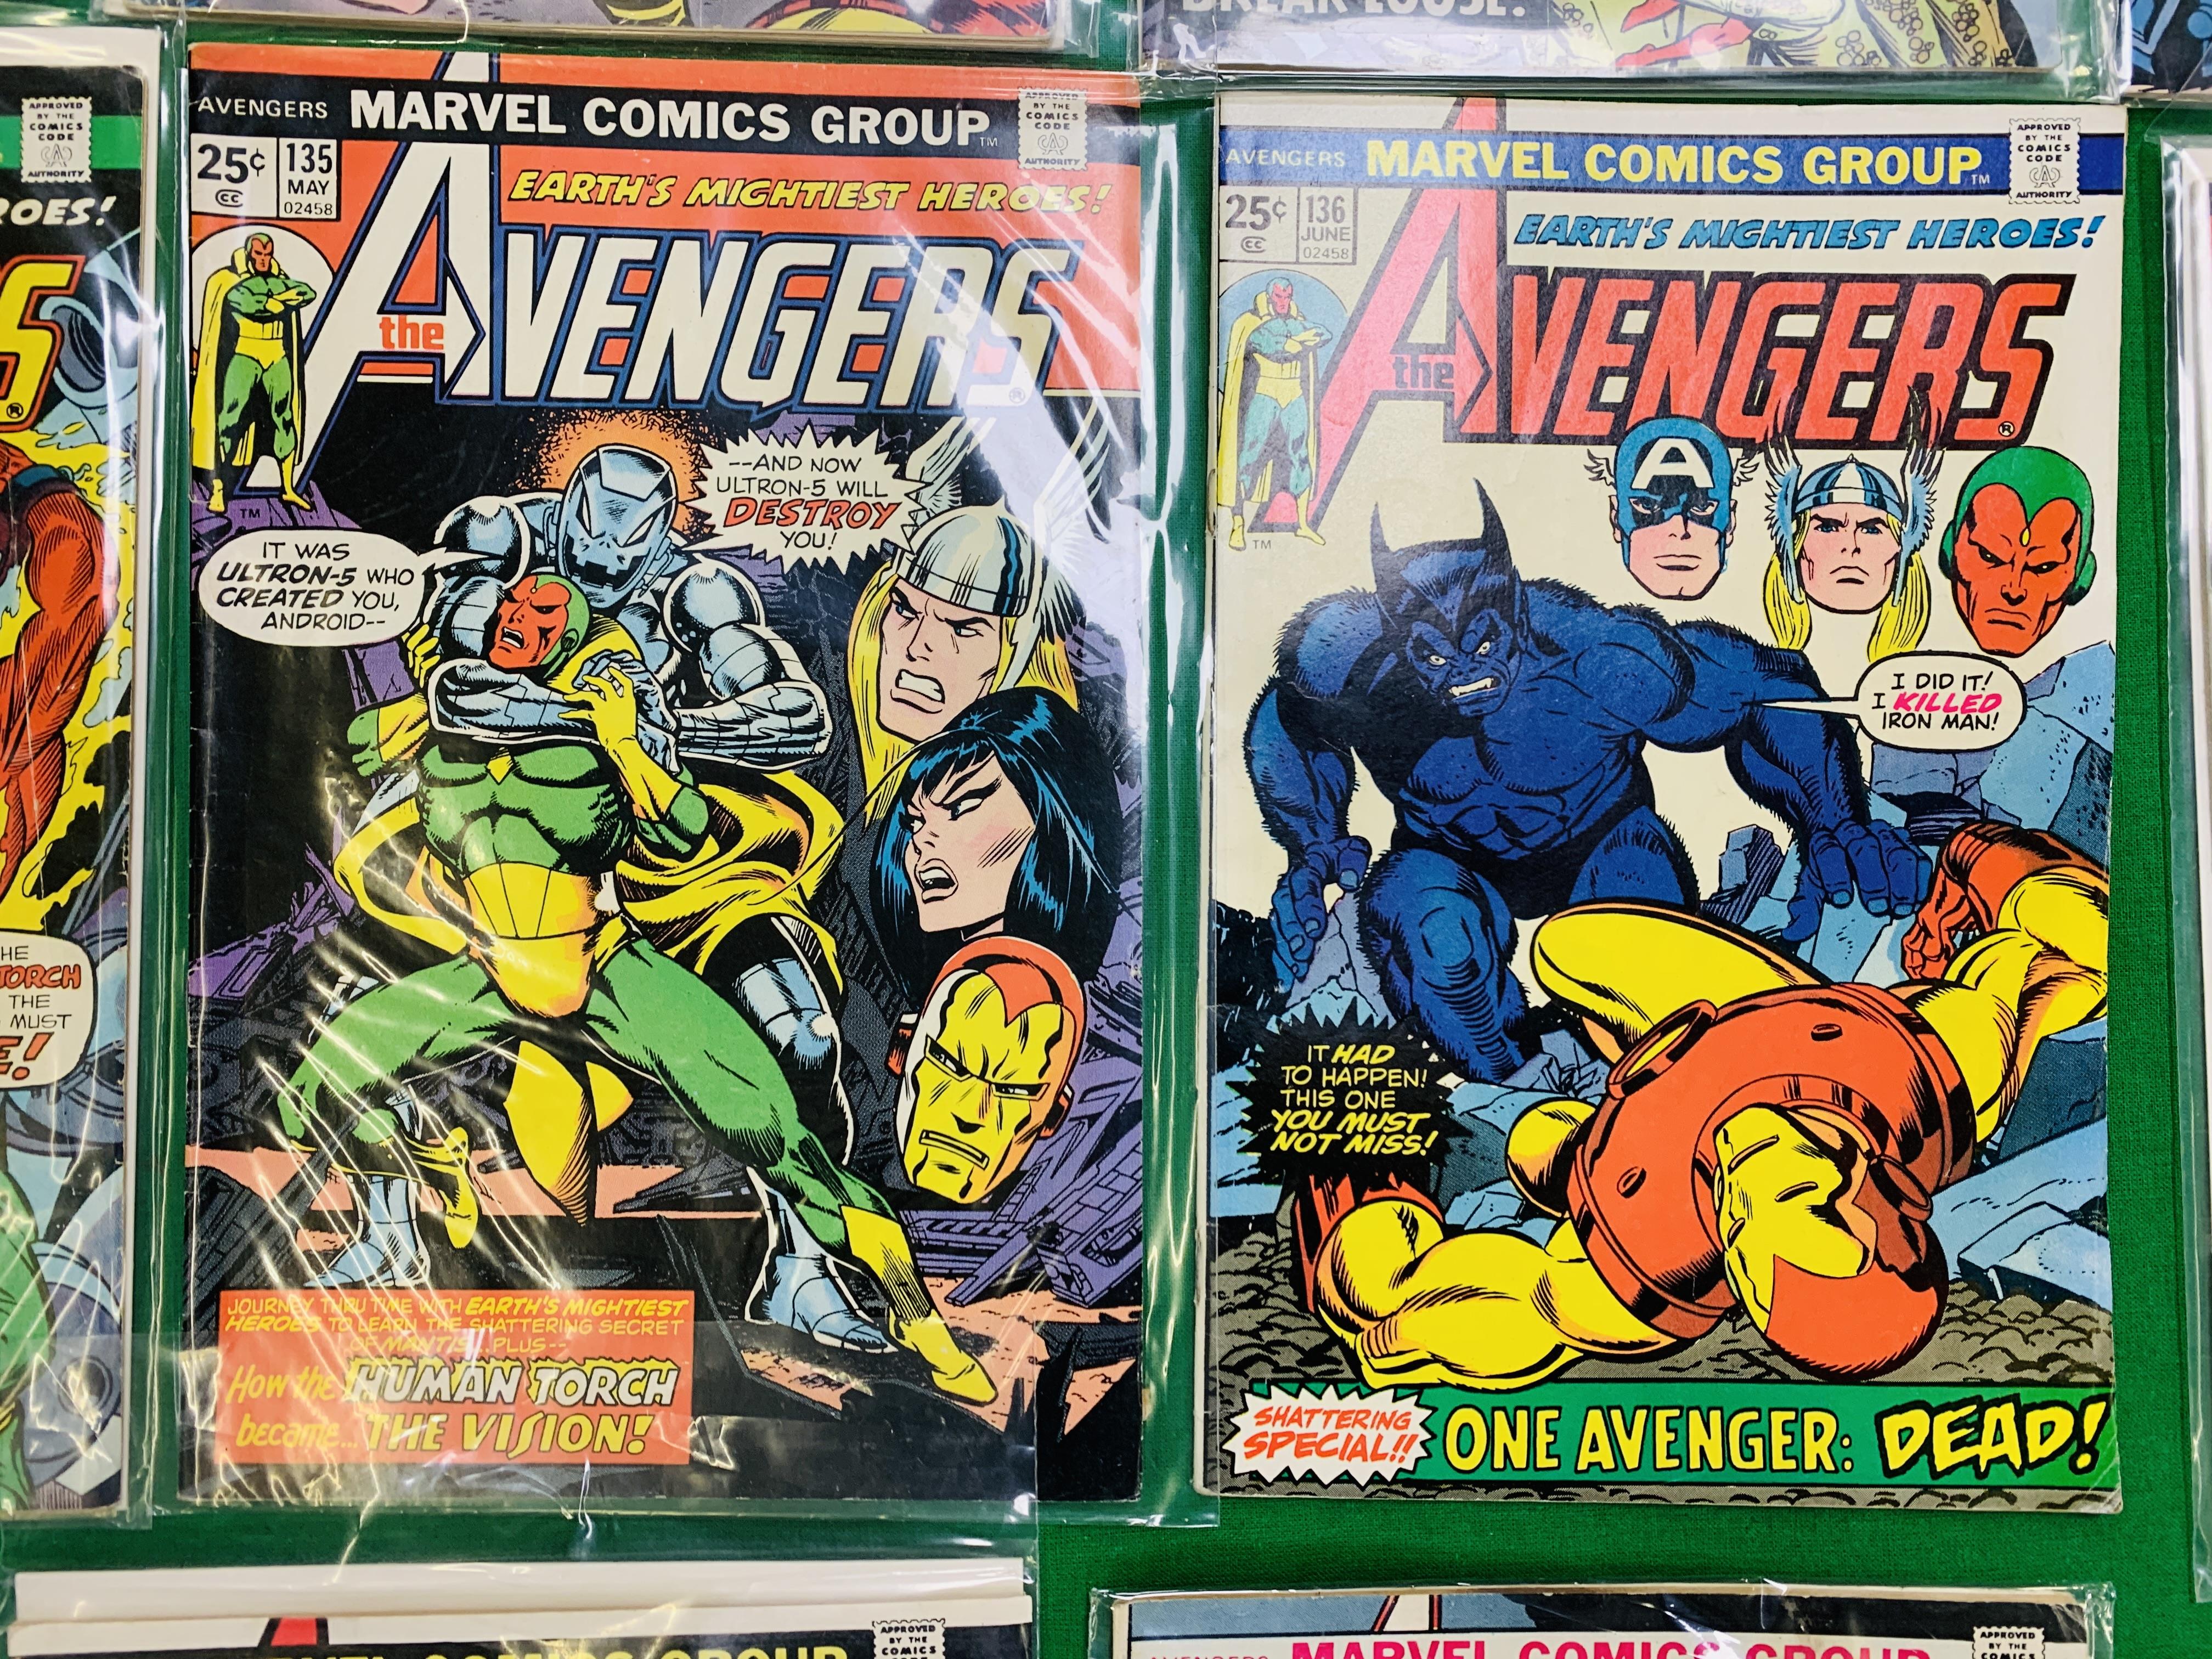 MARVEL COMICS THE AVENGERS NO. 101 - 299, MISSING ISSUES 103 AND 110. - Image 22 of 130